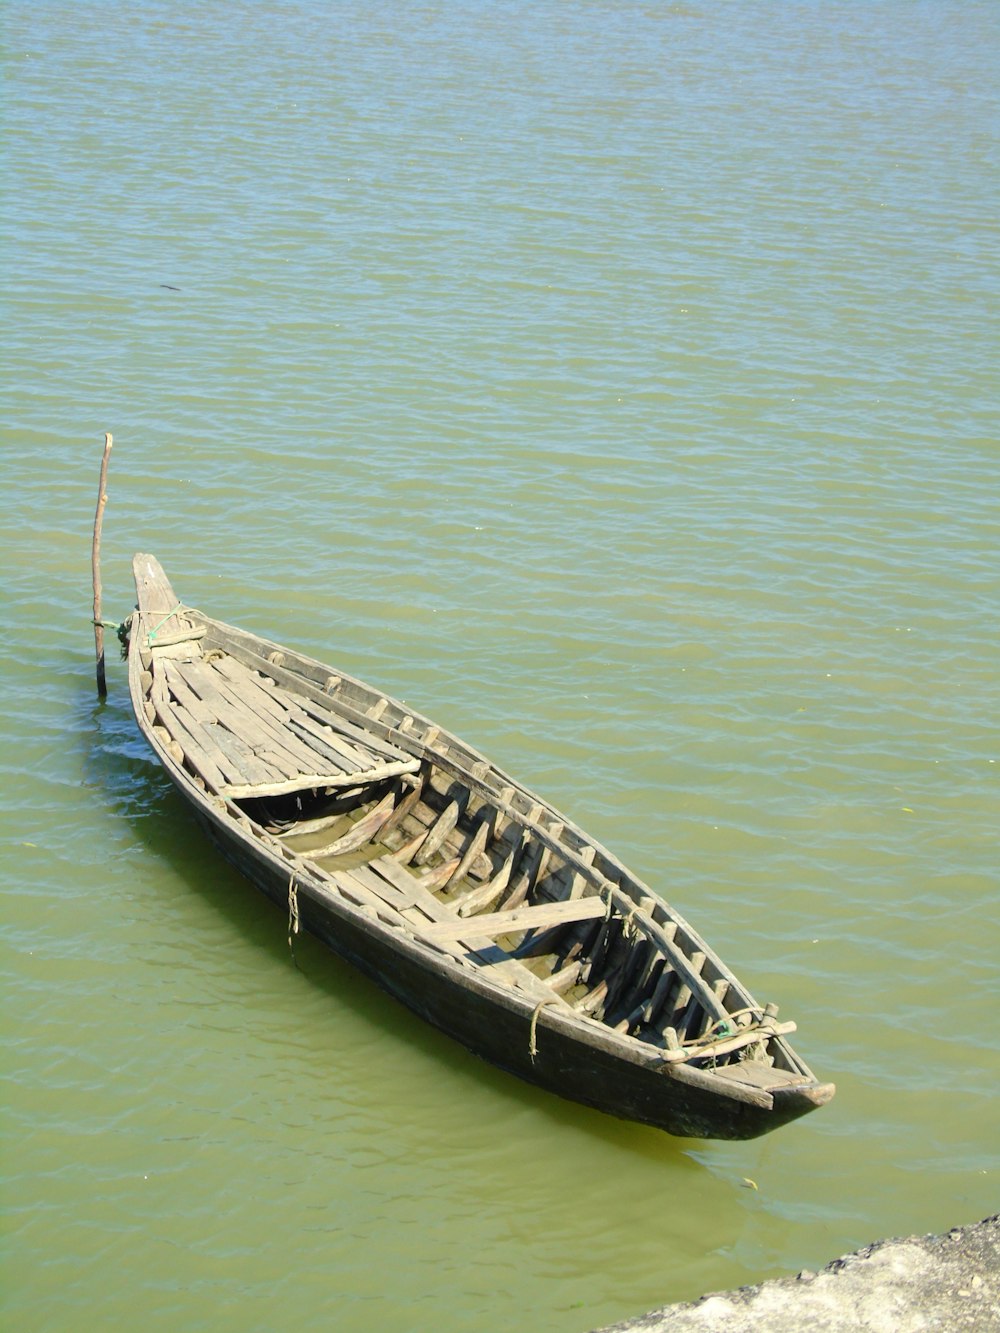 A small wooden boat floating on top of a lake photo – Free